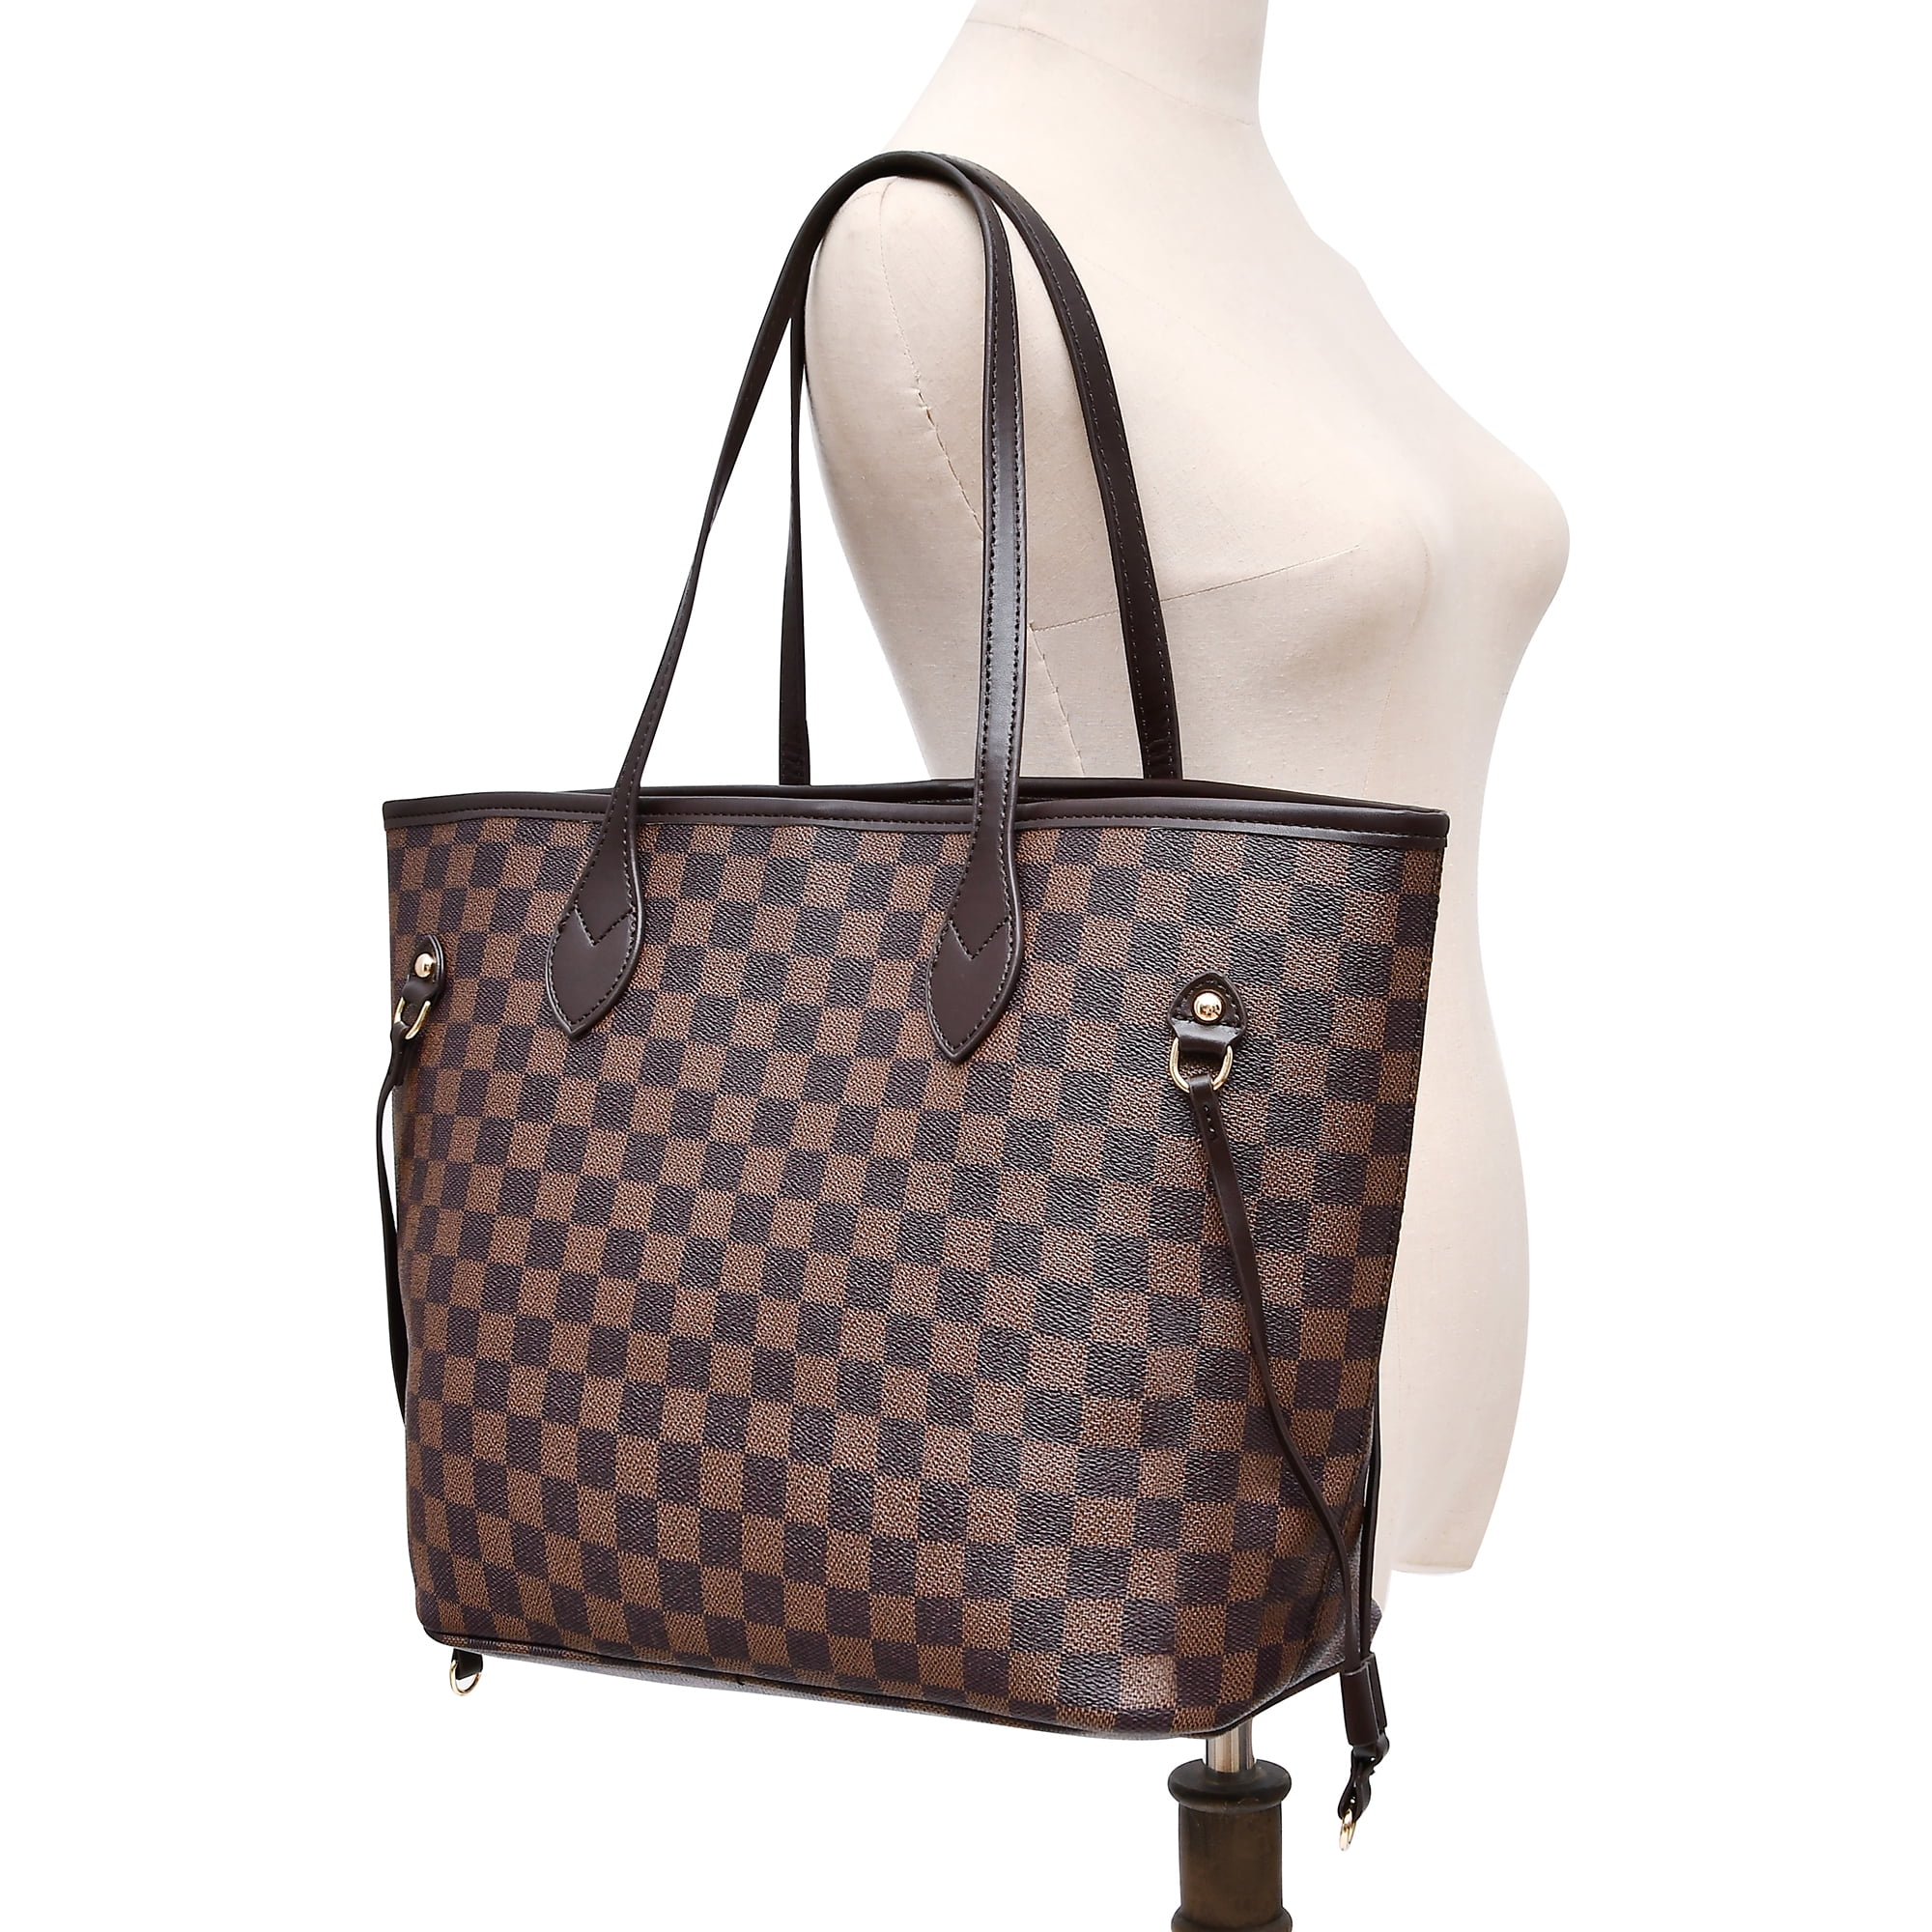 LOUIS VUITTON Women's Neverfull Leather in Cream